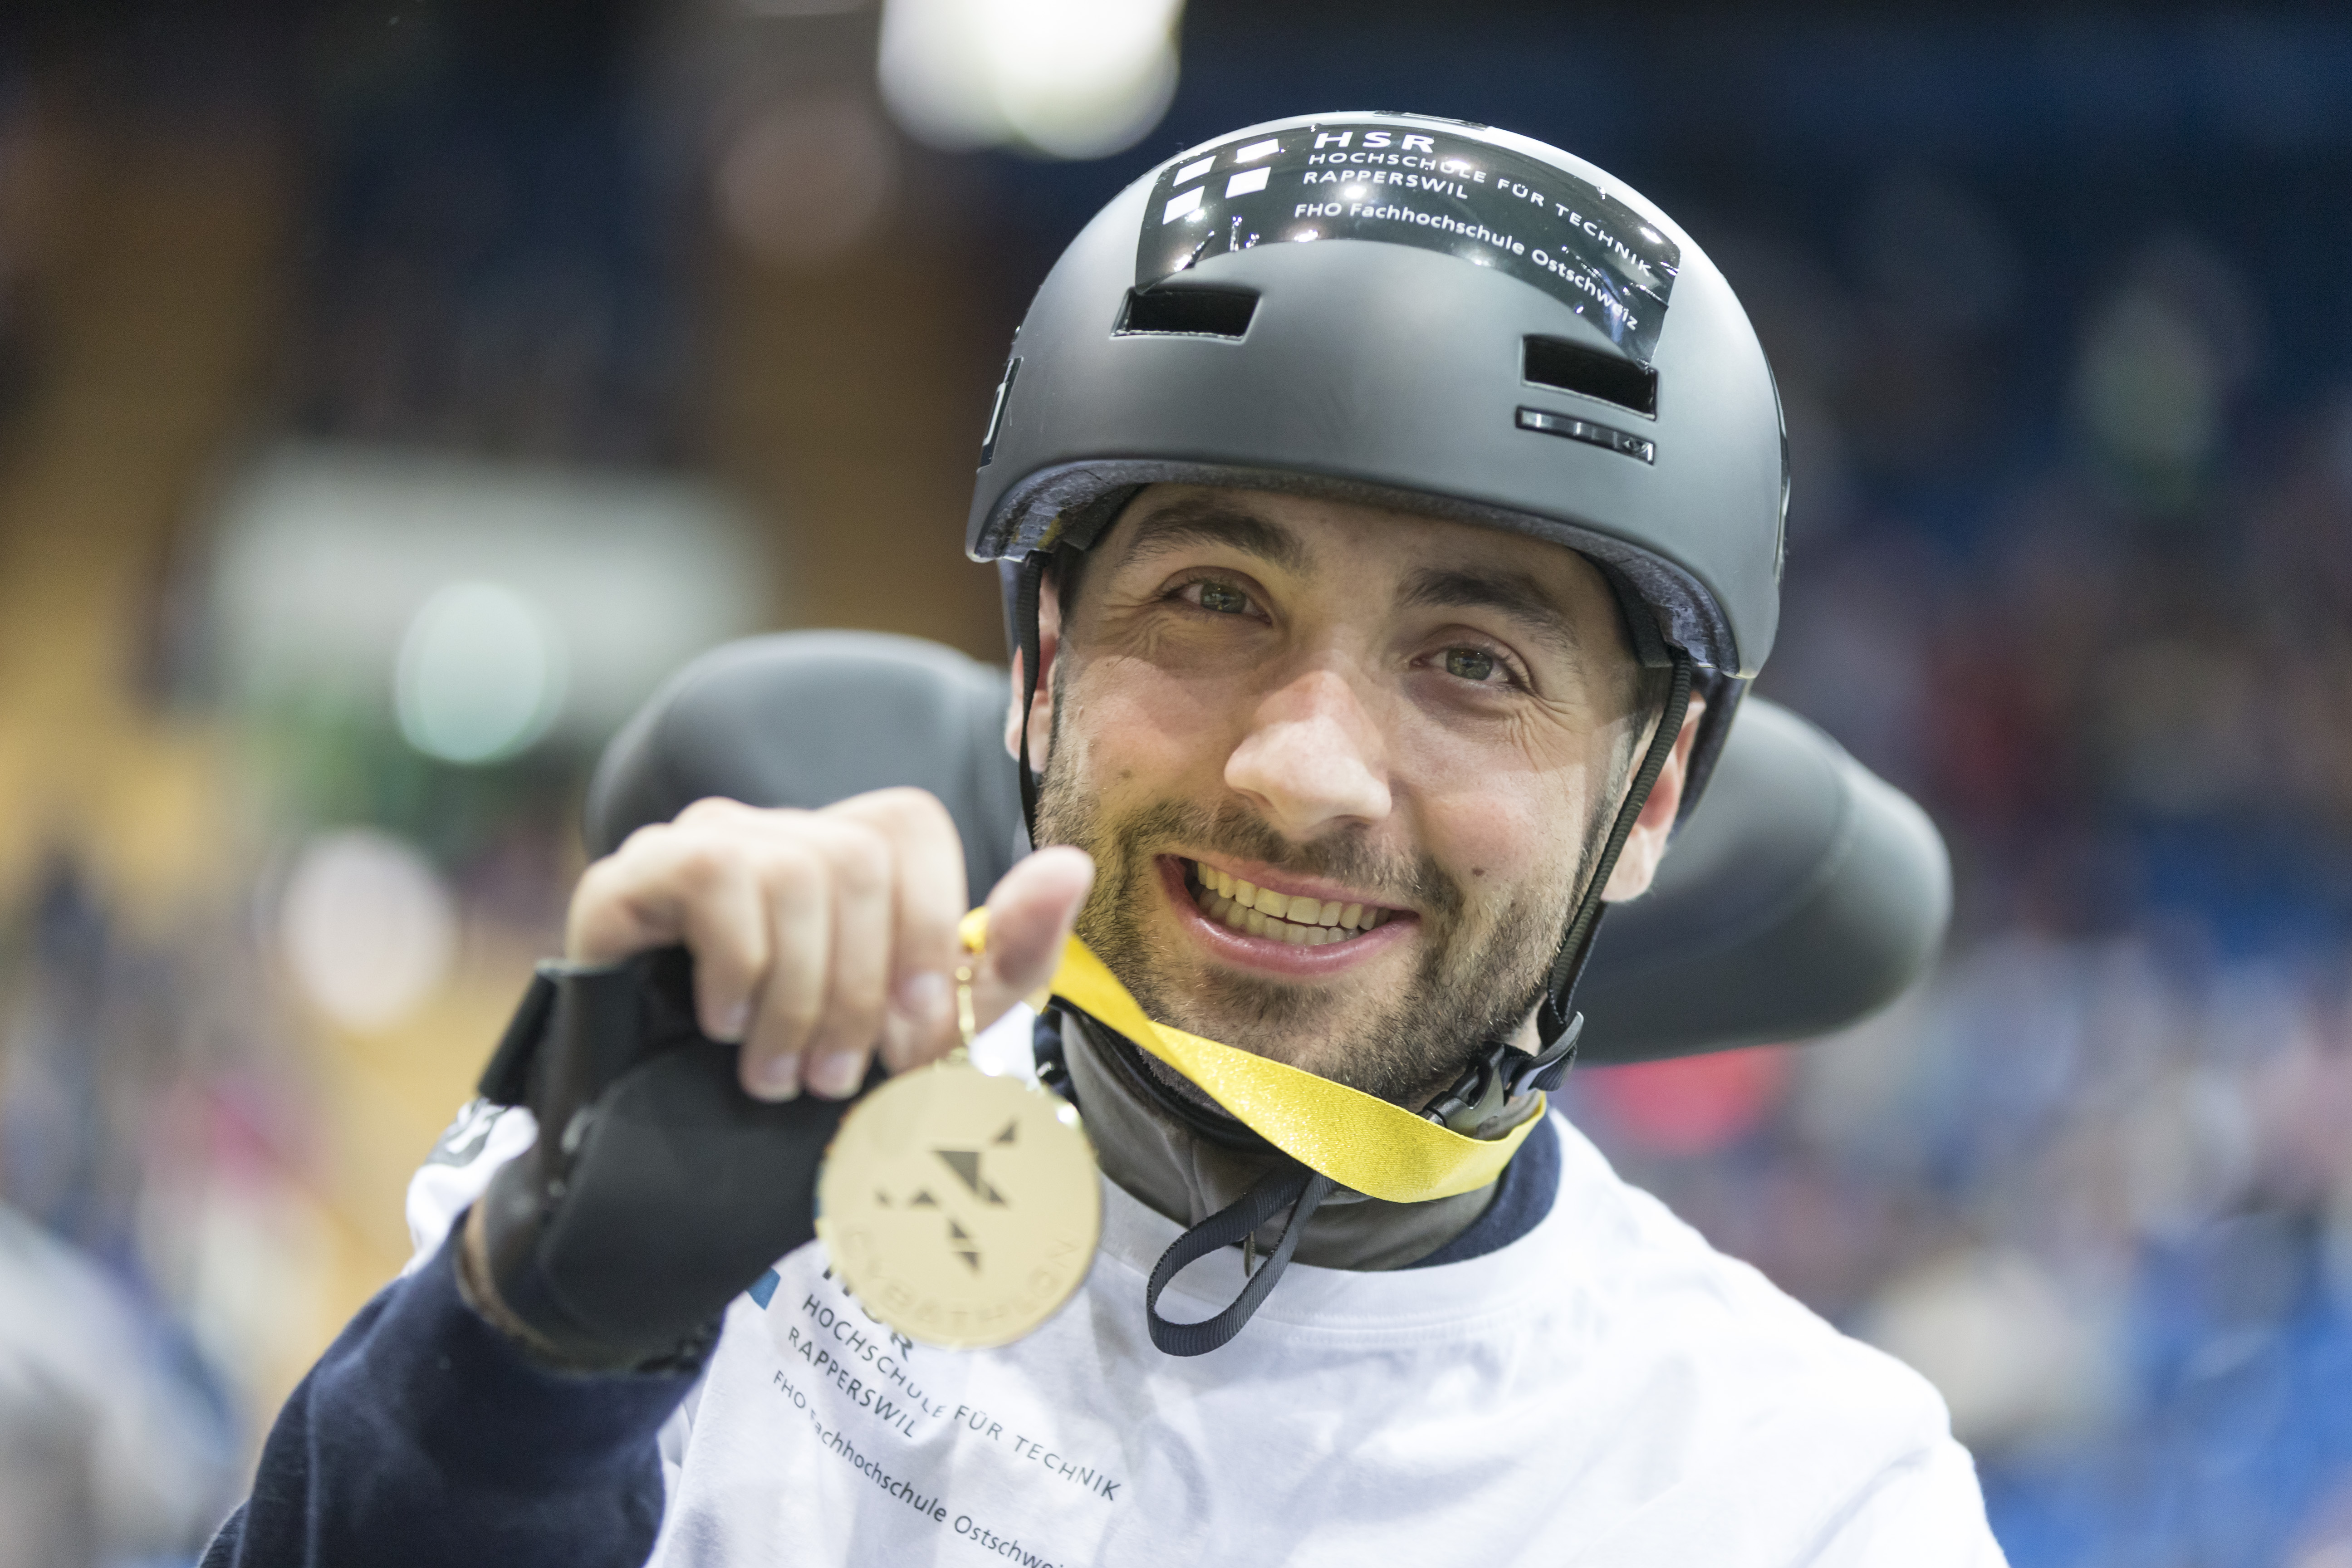 Pilot: Florian Hauser from the Swiss team HSR enhanced (OST and ETH Zurich), winner of the Powered Wheelchair Race in 2016 and competing again in 2020 in the same constellation. © ETH Zürich / Alessandro Della Bella